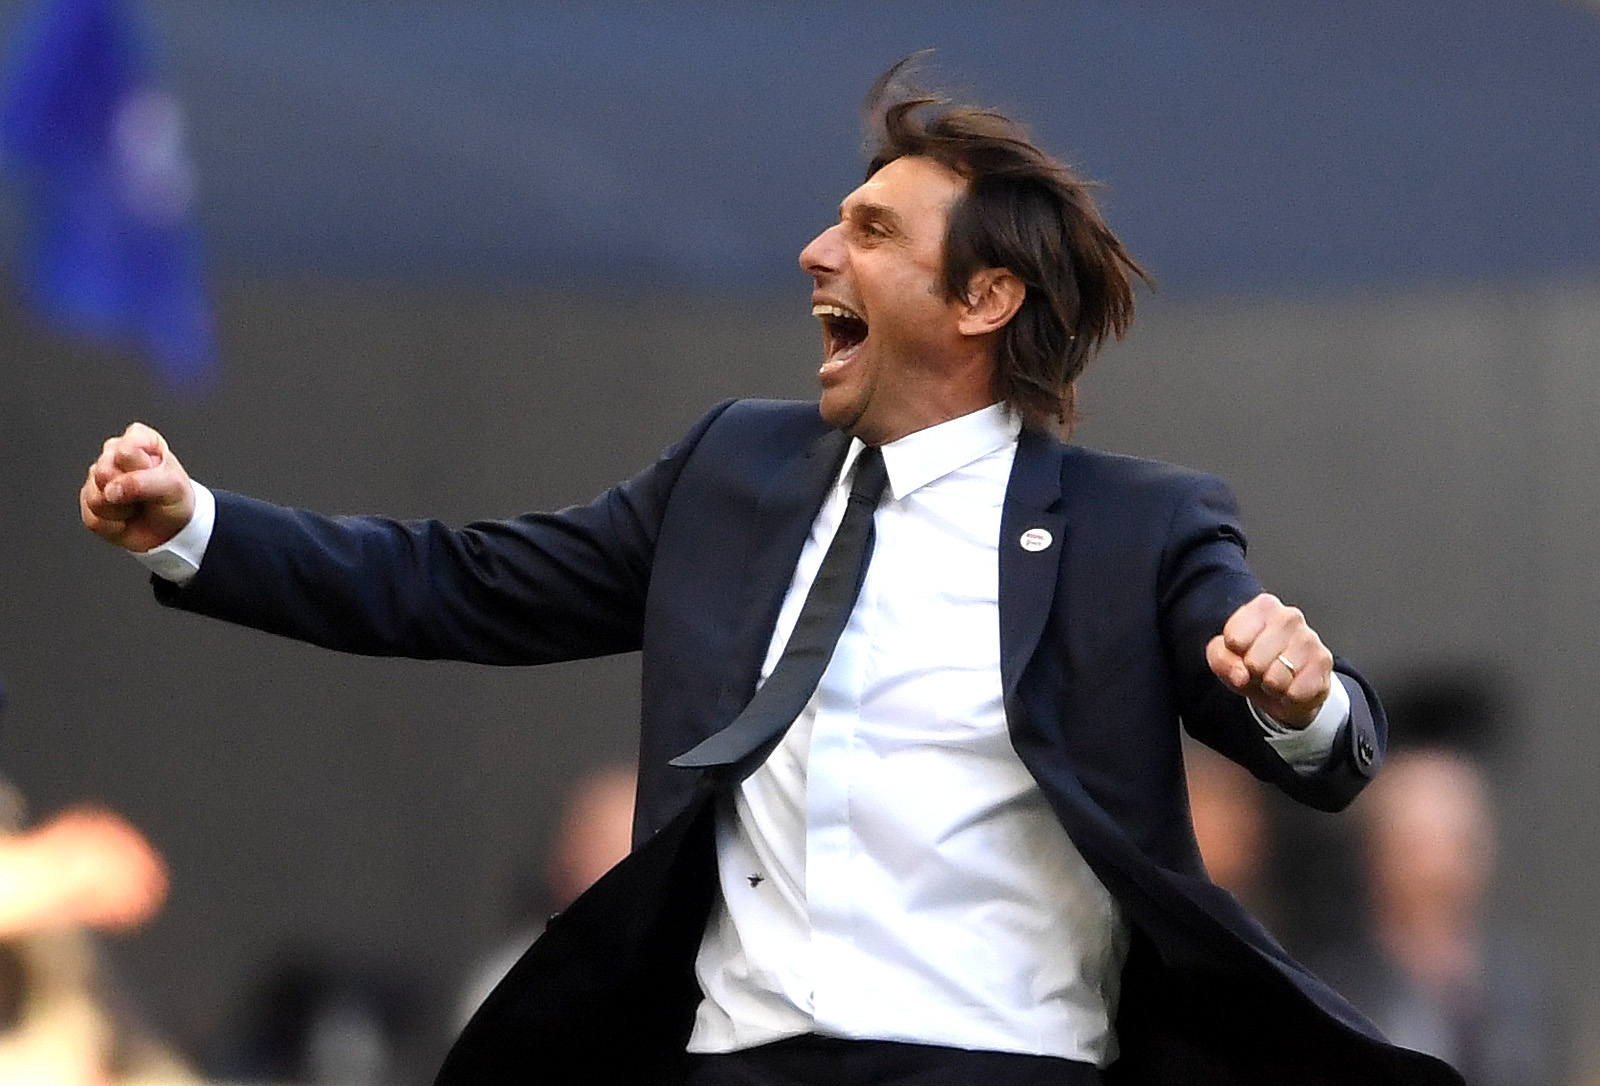 LONDON, ENGLAND - MAY 19: Antonio Conte, Manager of Chelsea celebrates his sides victory following The Emirates FA Cup Final between Chelsea and Manchester United at Wembley Stadium on May 19, 2018 in London, England. (Photo by Laurence Griffiths/Getty Images)